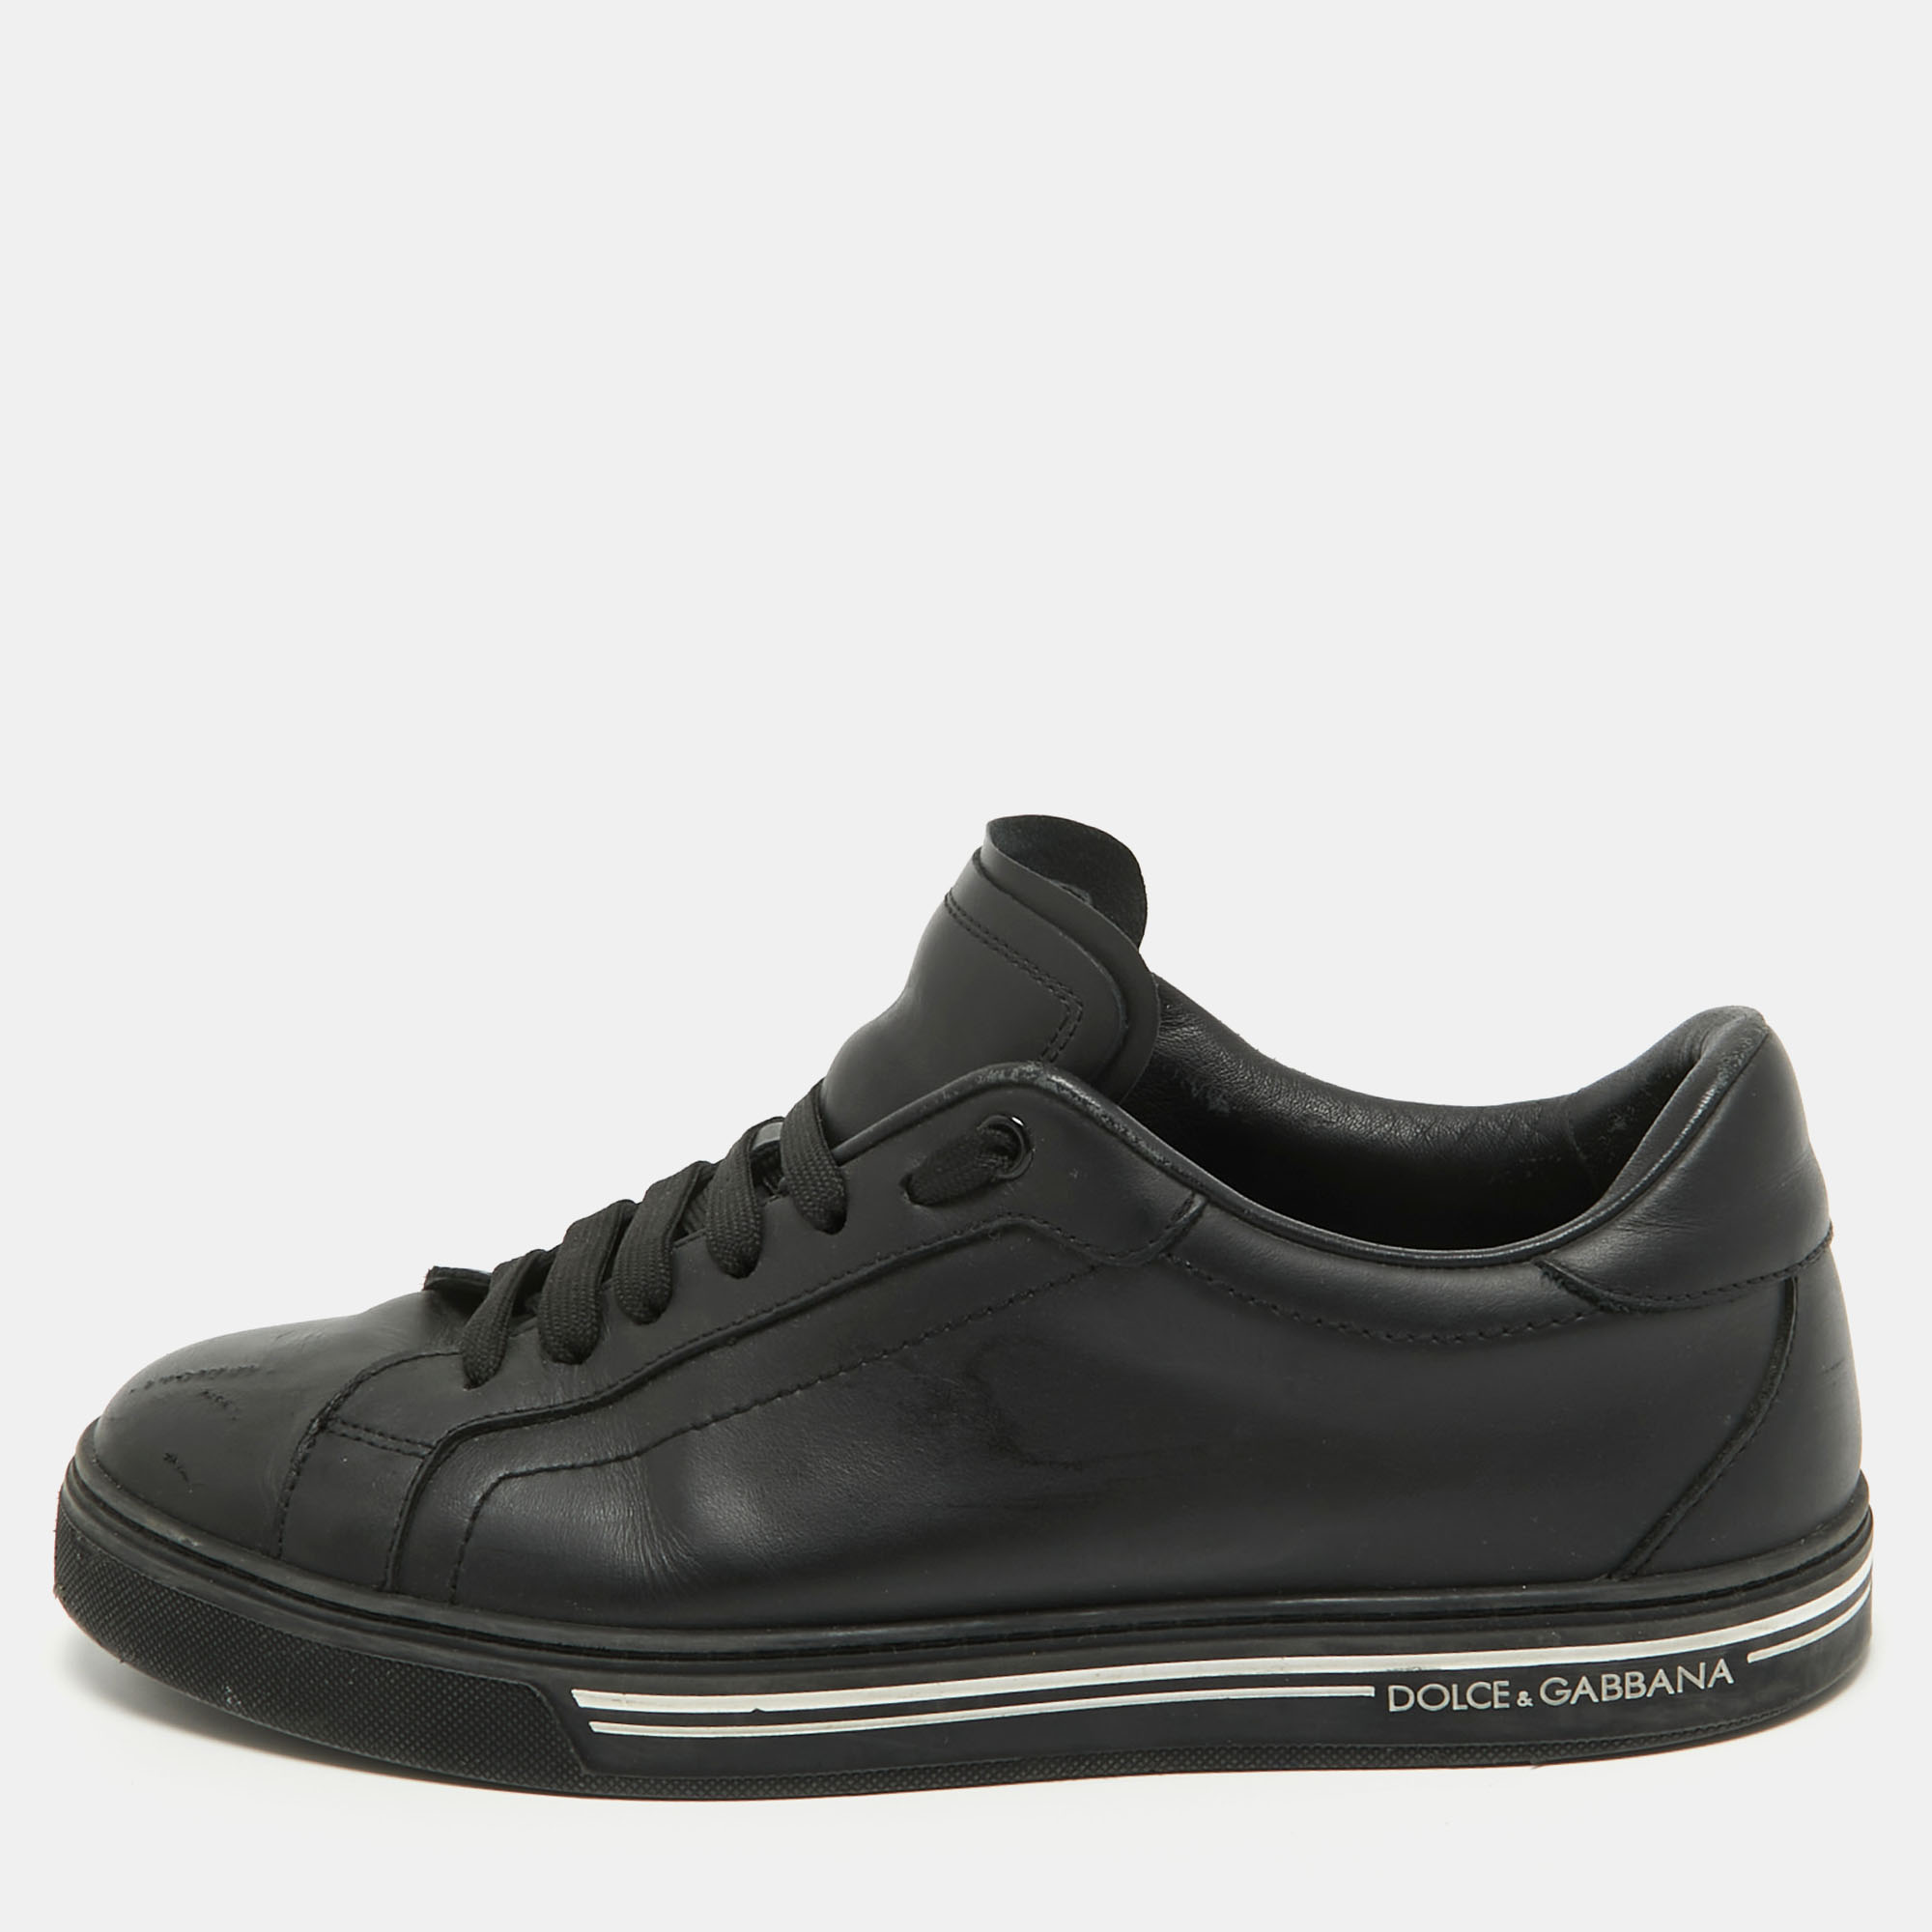 Dolce & Gabbana Black Leather Low Top Sneakers Size 41